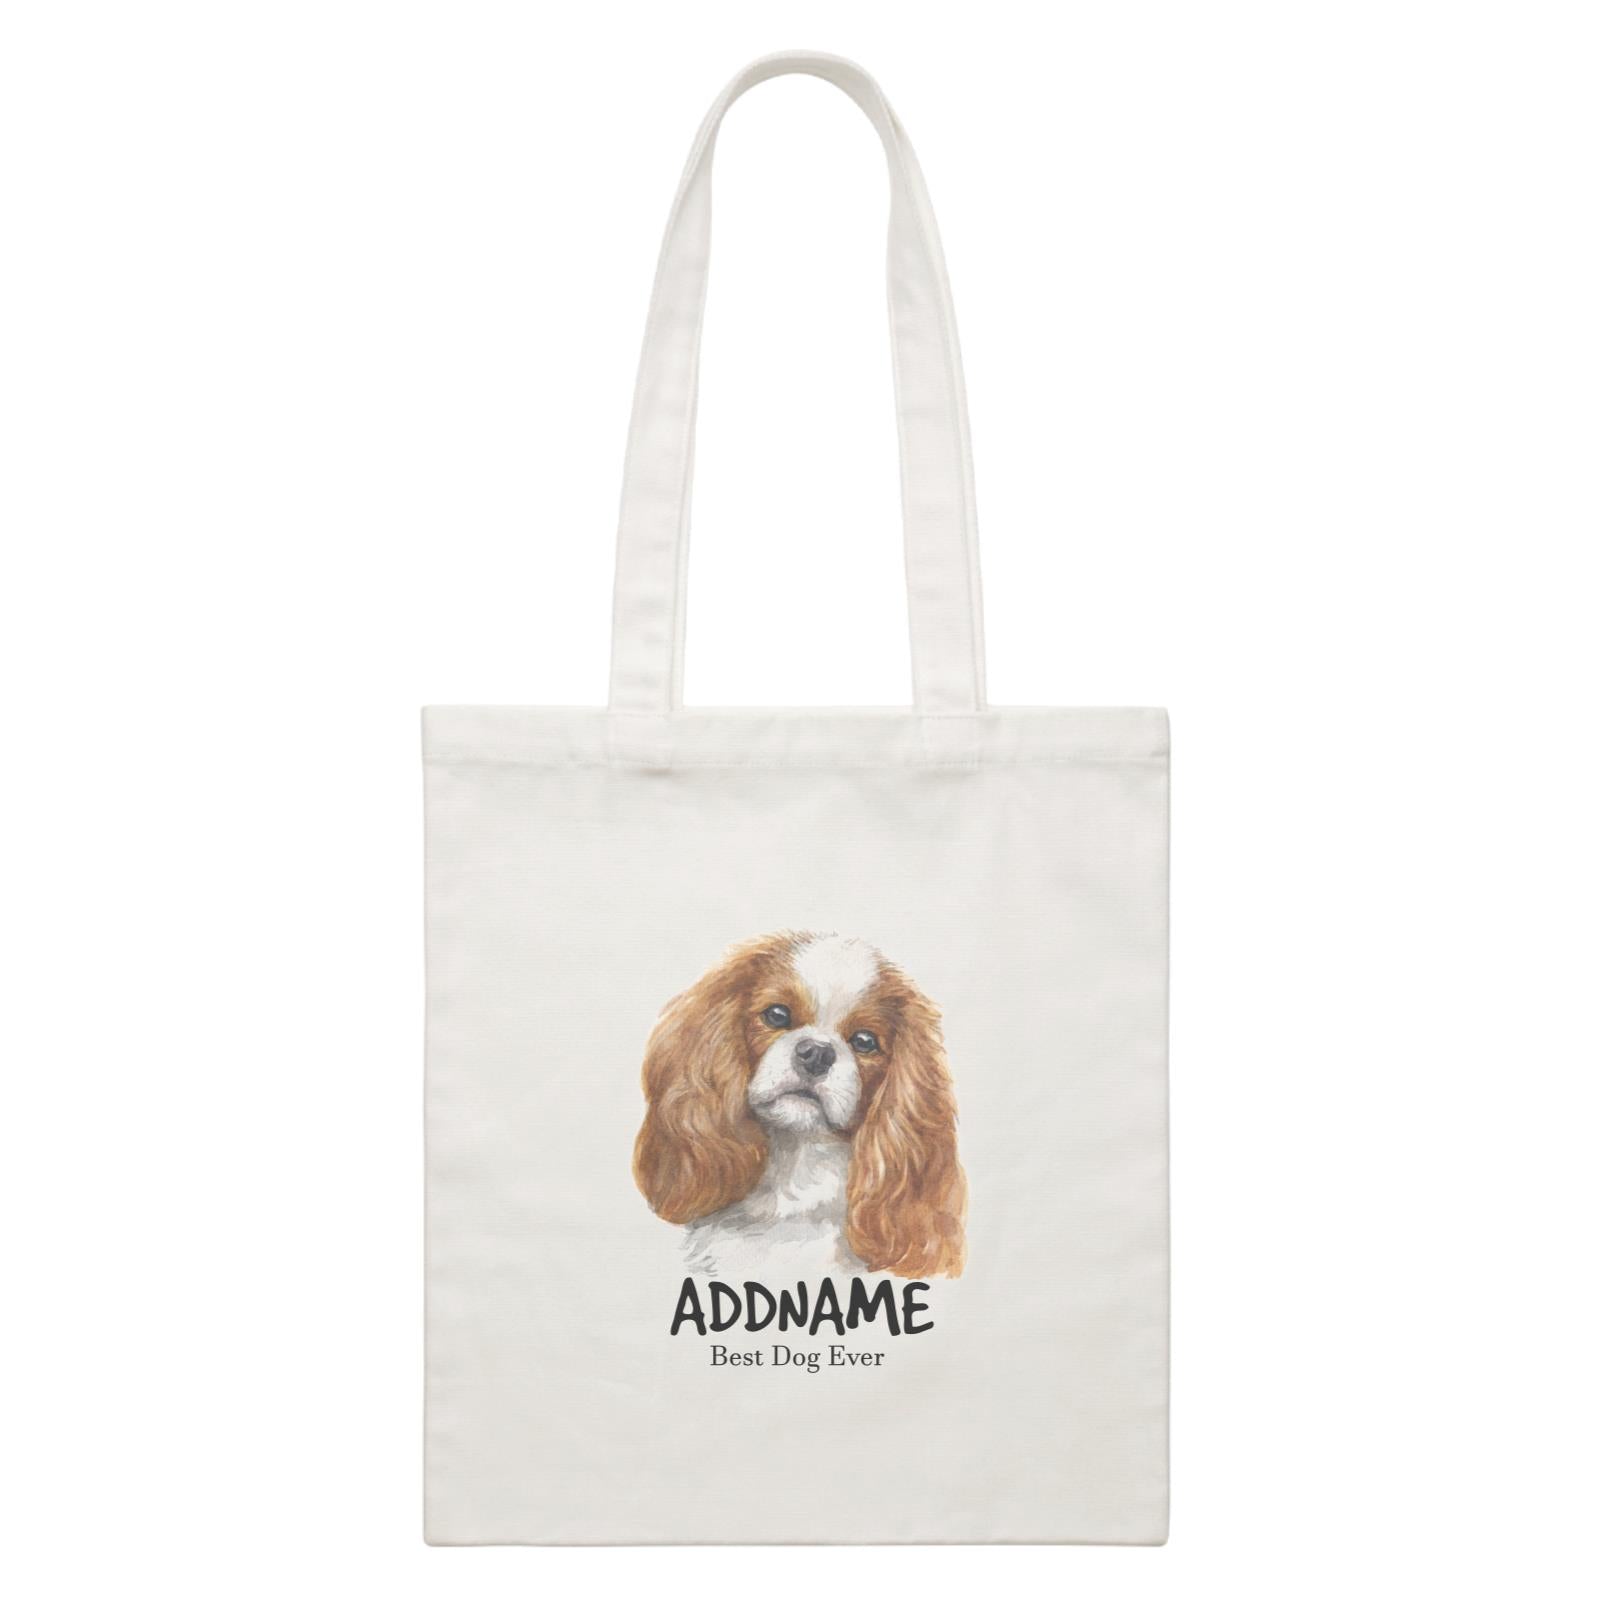 Watercolor Dog King Charles Spaniel Best Dog Ever Addname White Canvas Bag